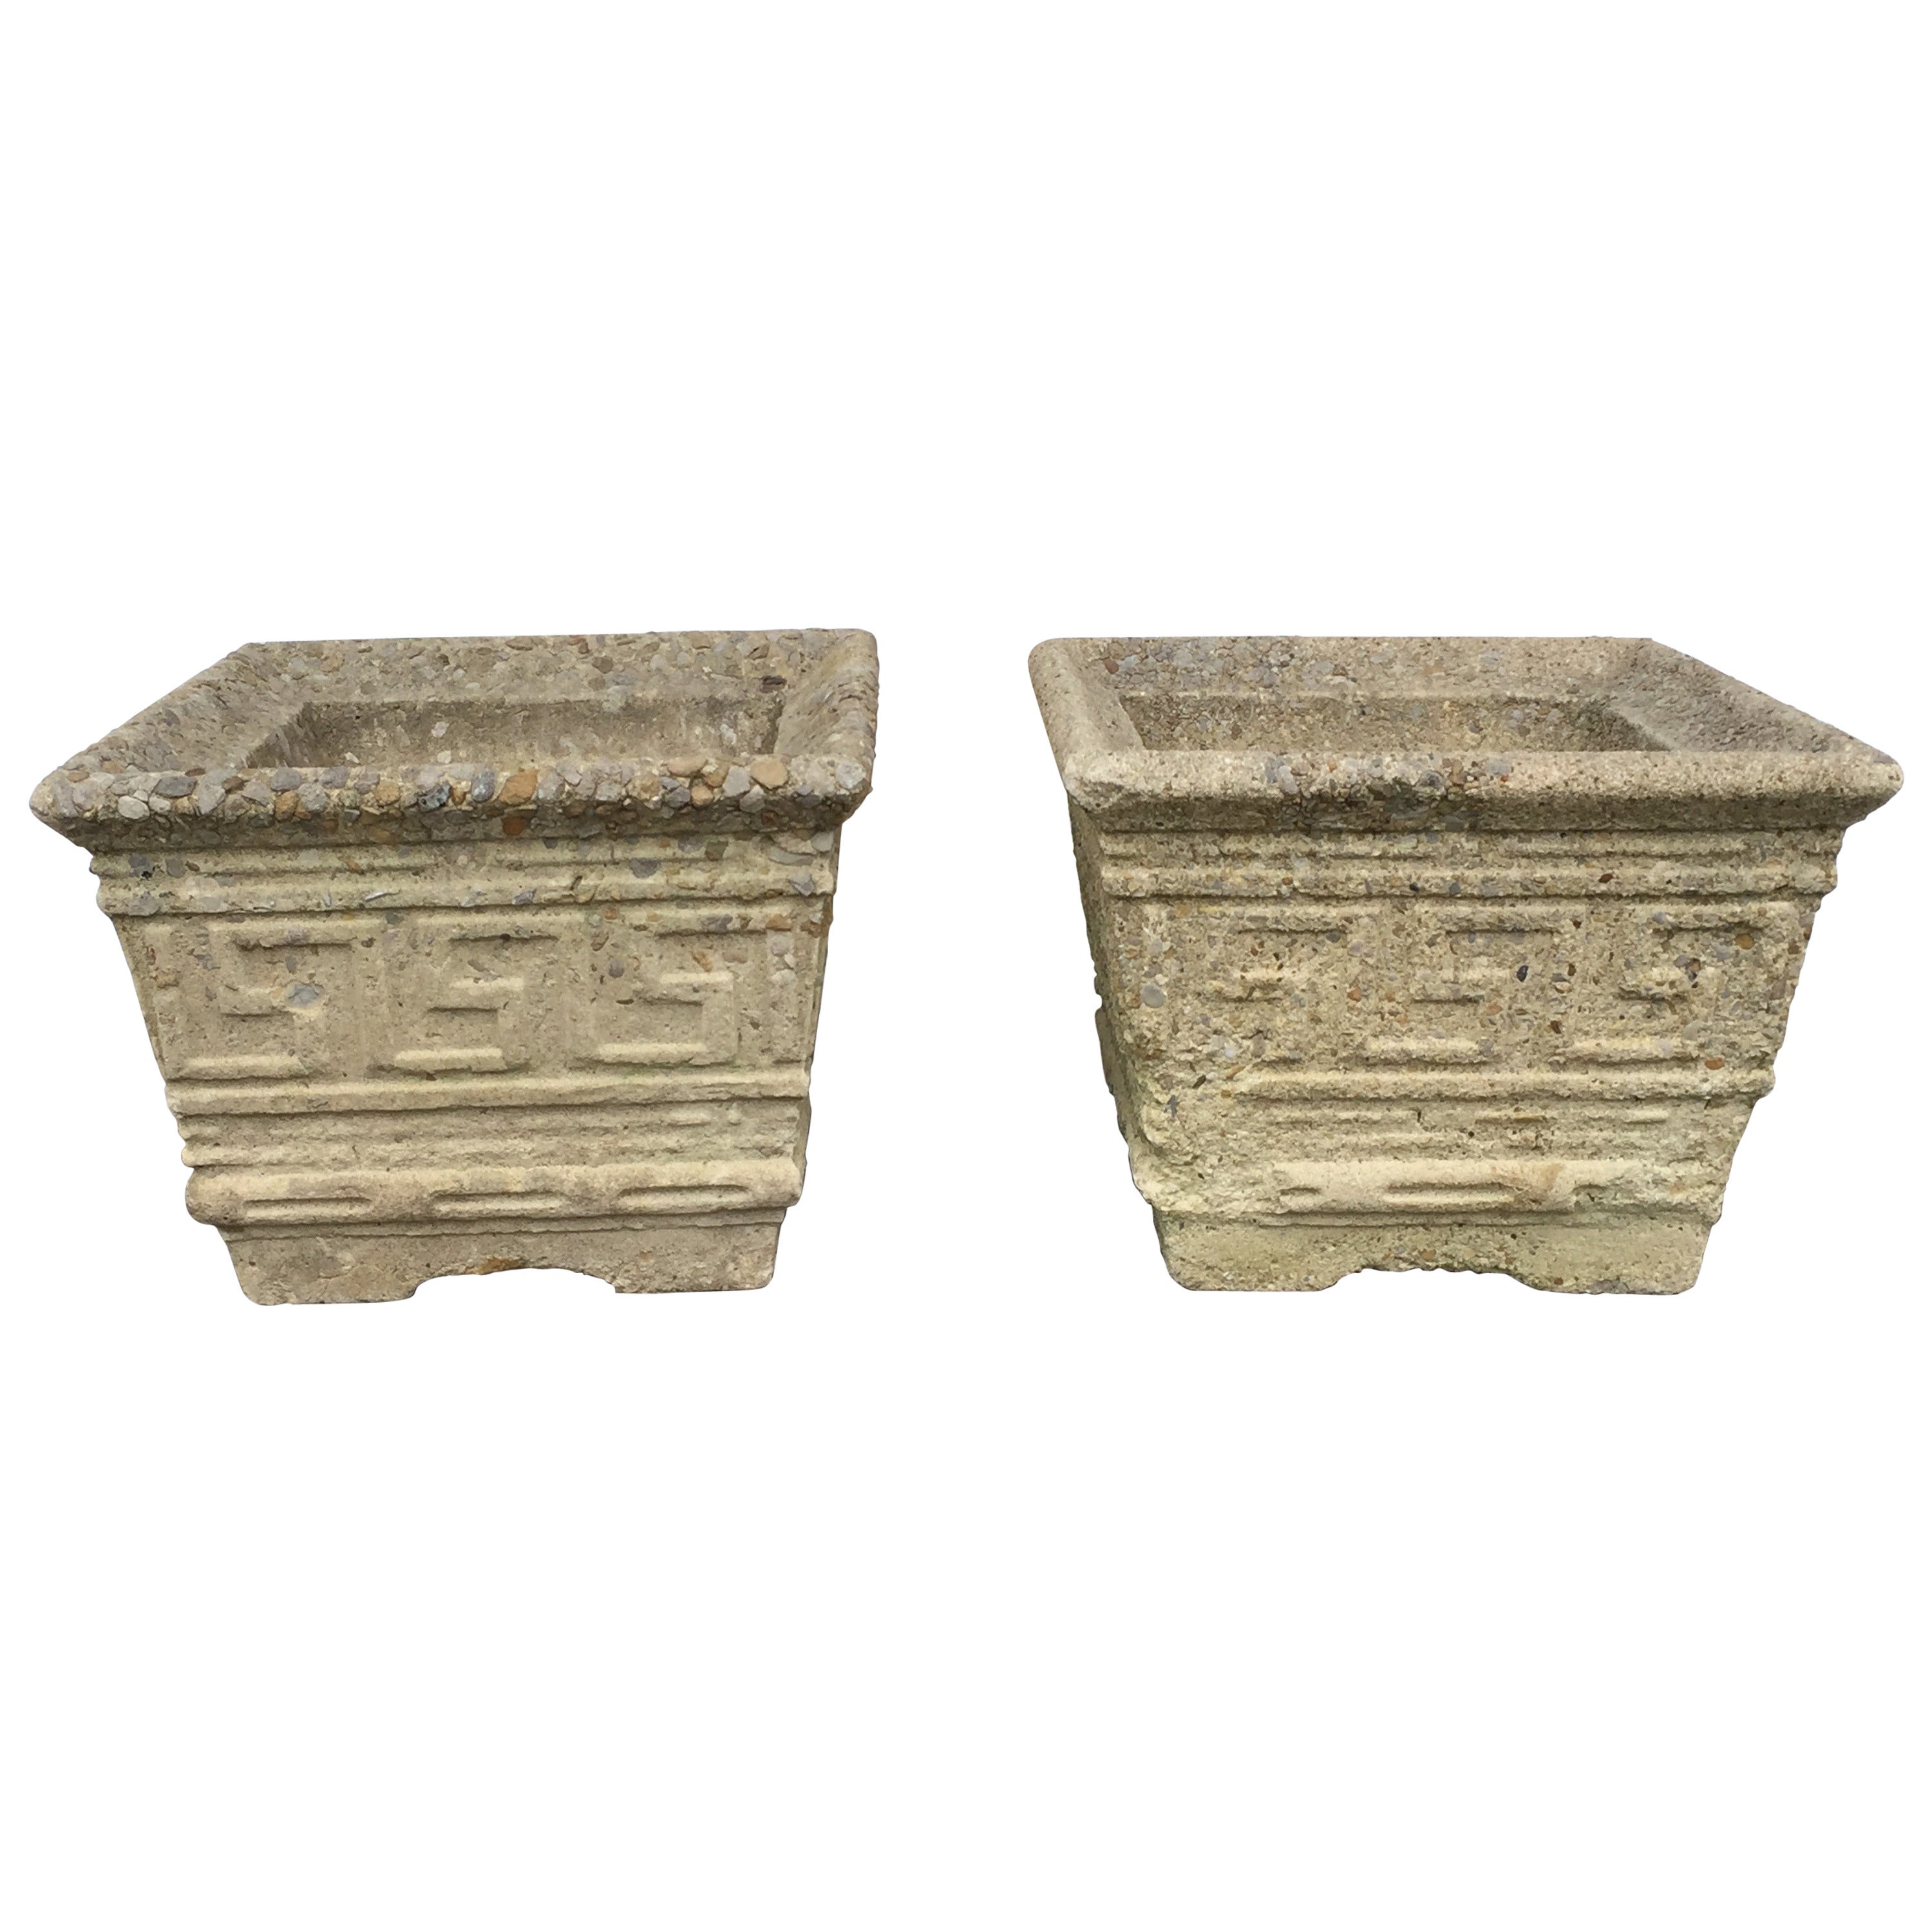 What is a cast stone planter?